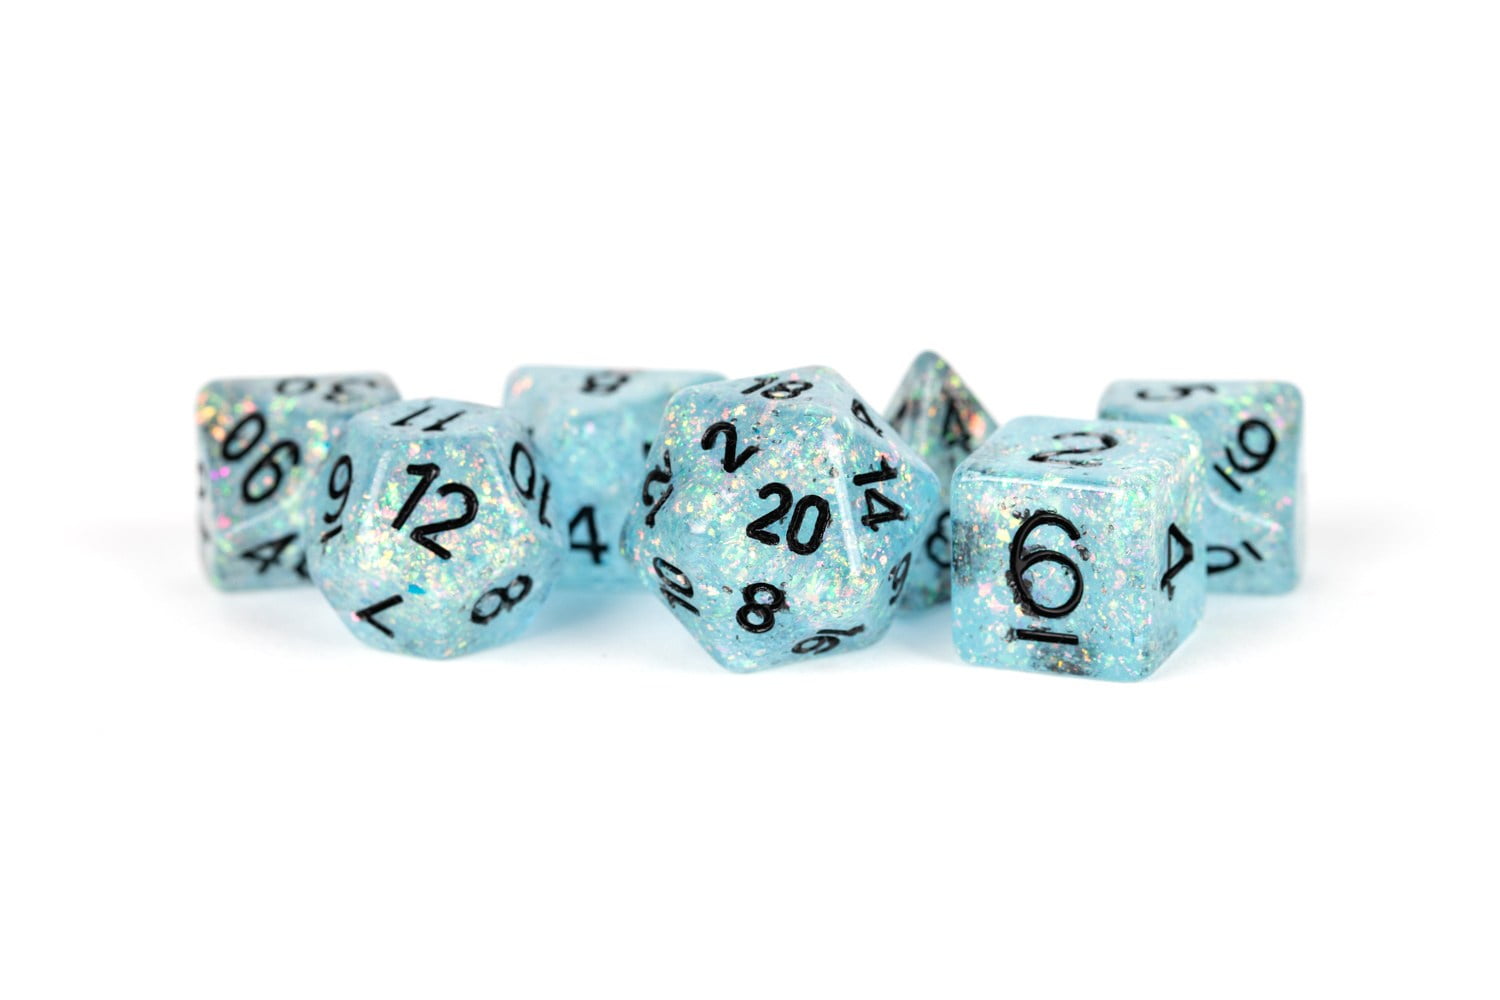 Lic682 Flash Dice, Blue With Black Numbers - Set Of 7